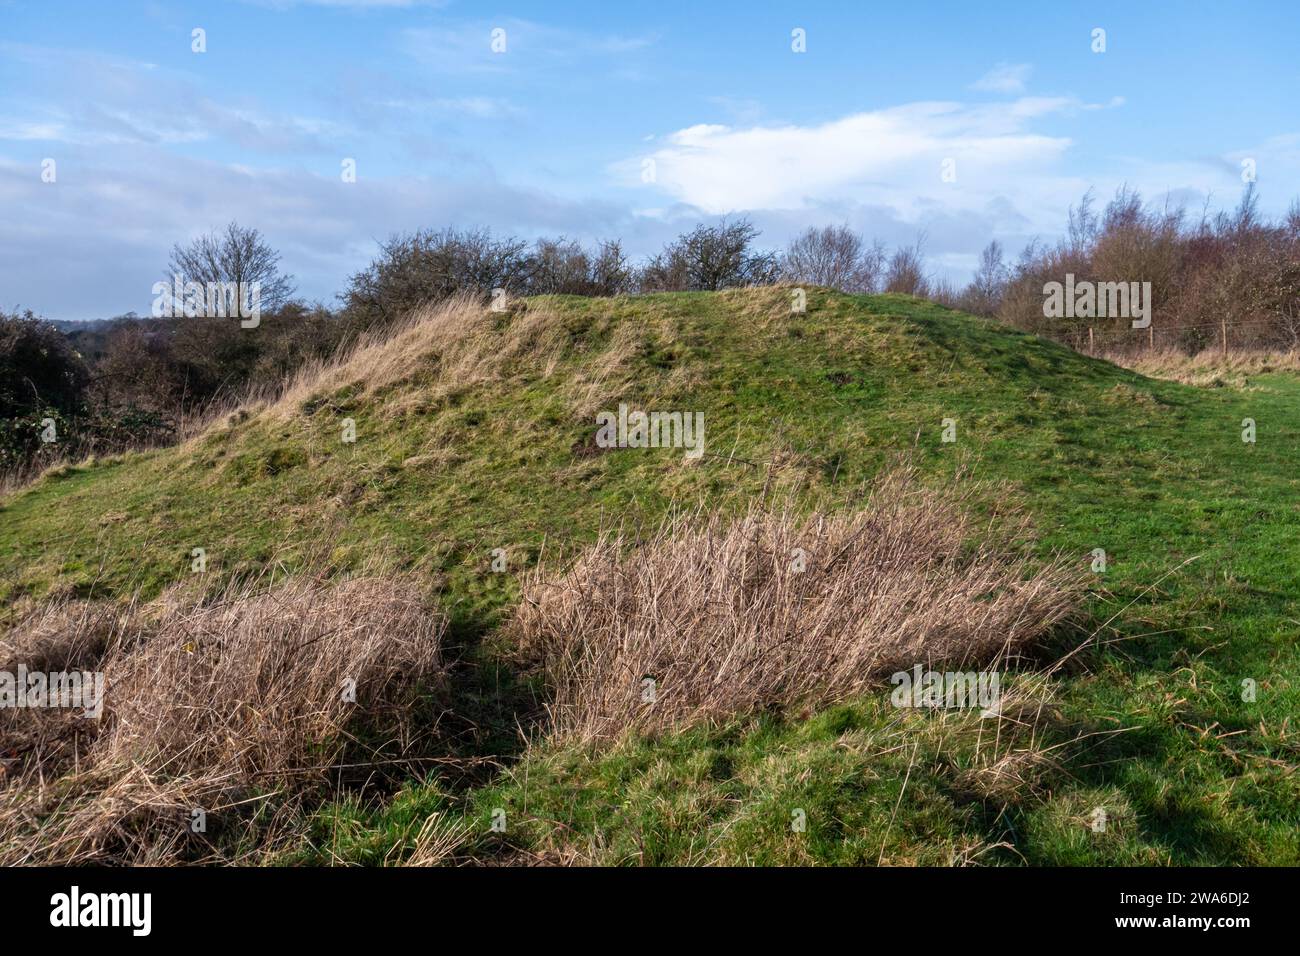 Bronze Age Round Barrows or tumuli on Magdalen Hill Down nature reserve near Winchester, England, UK. These are Scheduled Ancient Monuments. Stock Photo